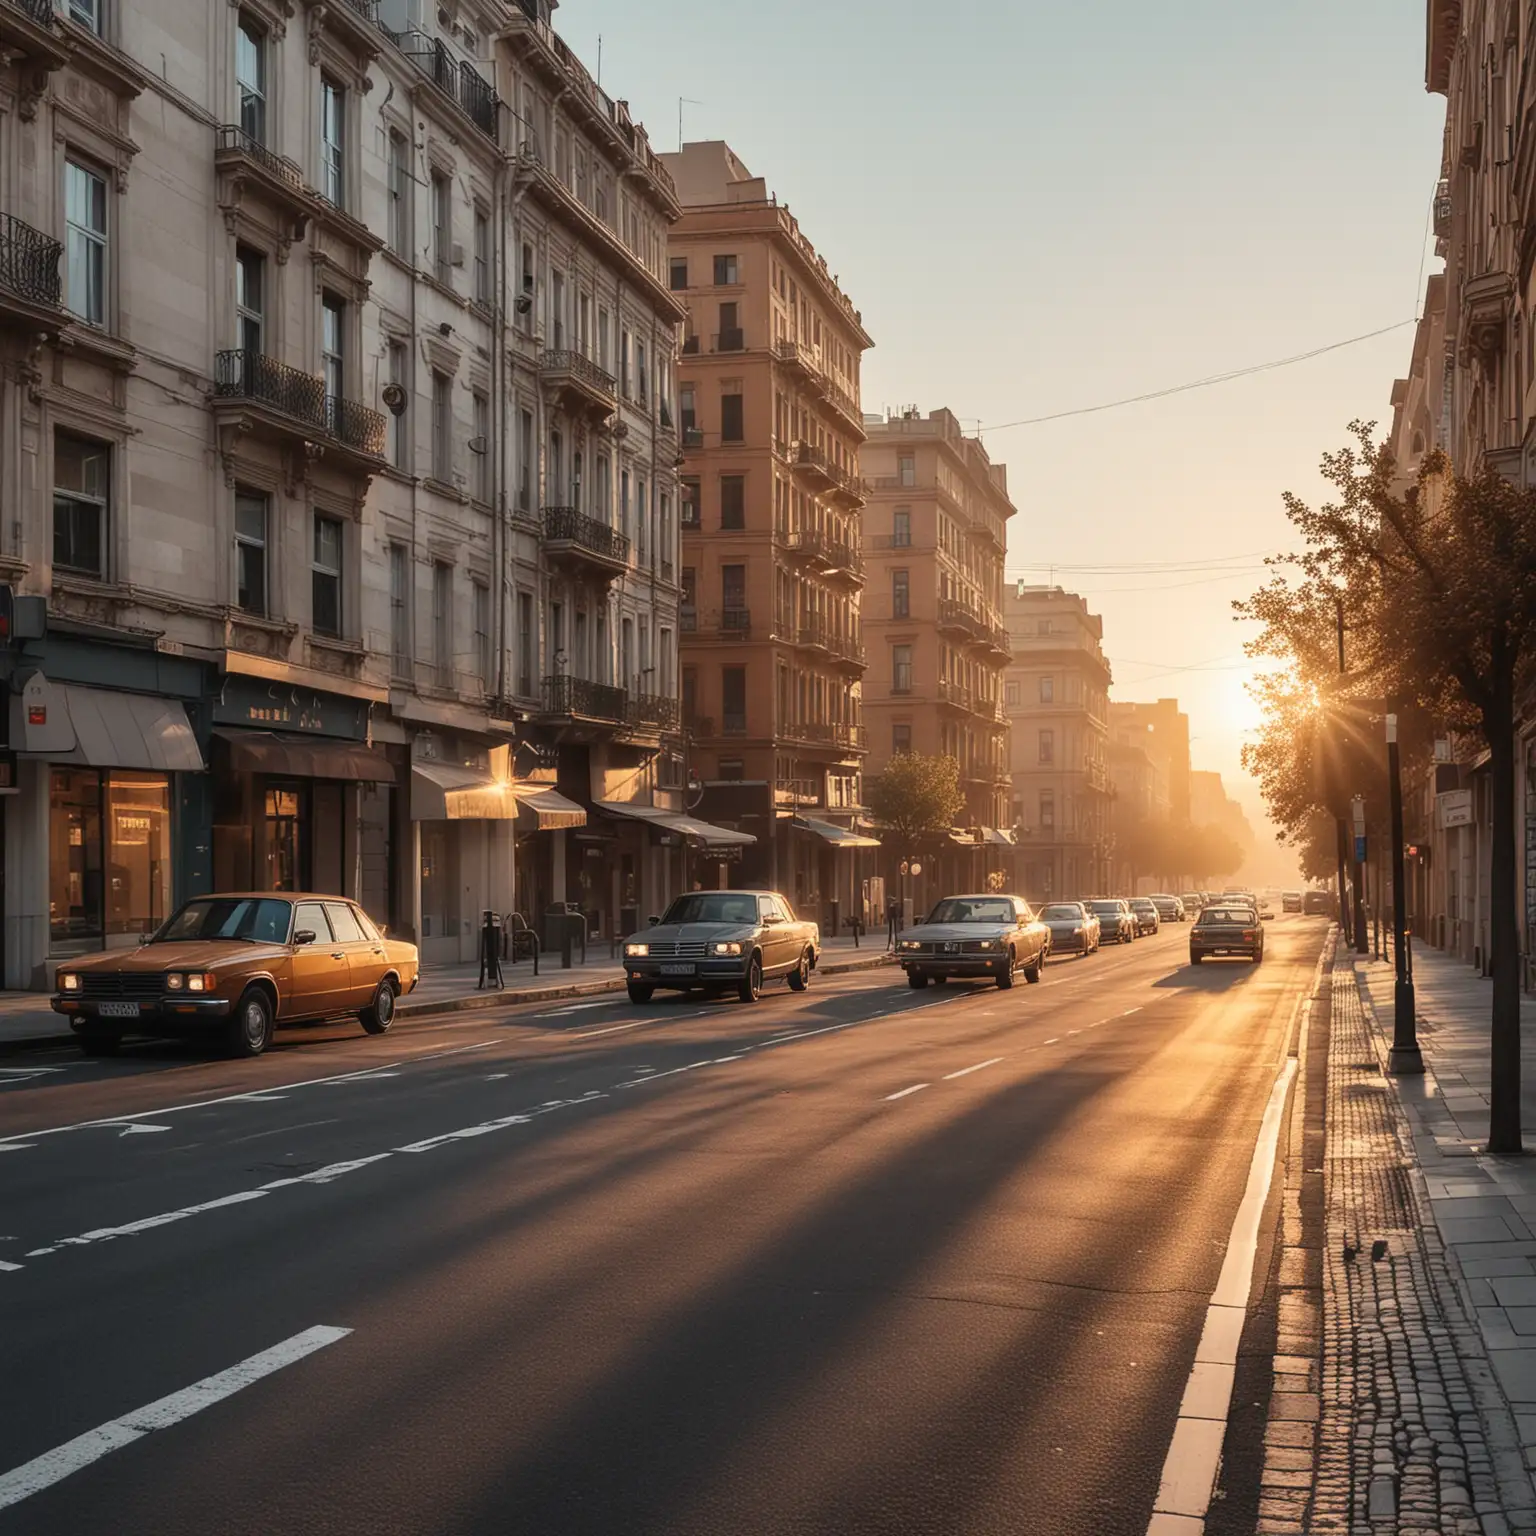 aesthetic street images in morning with road and cars
